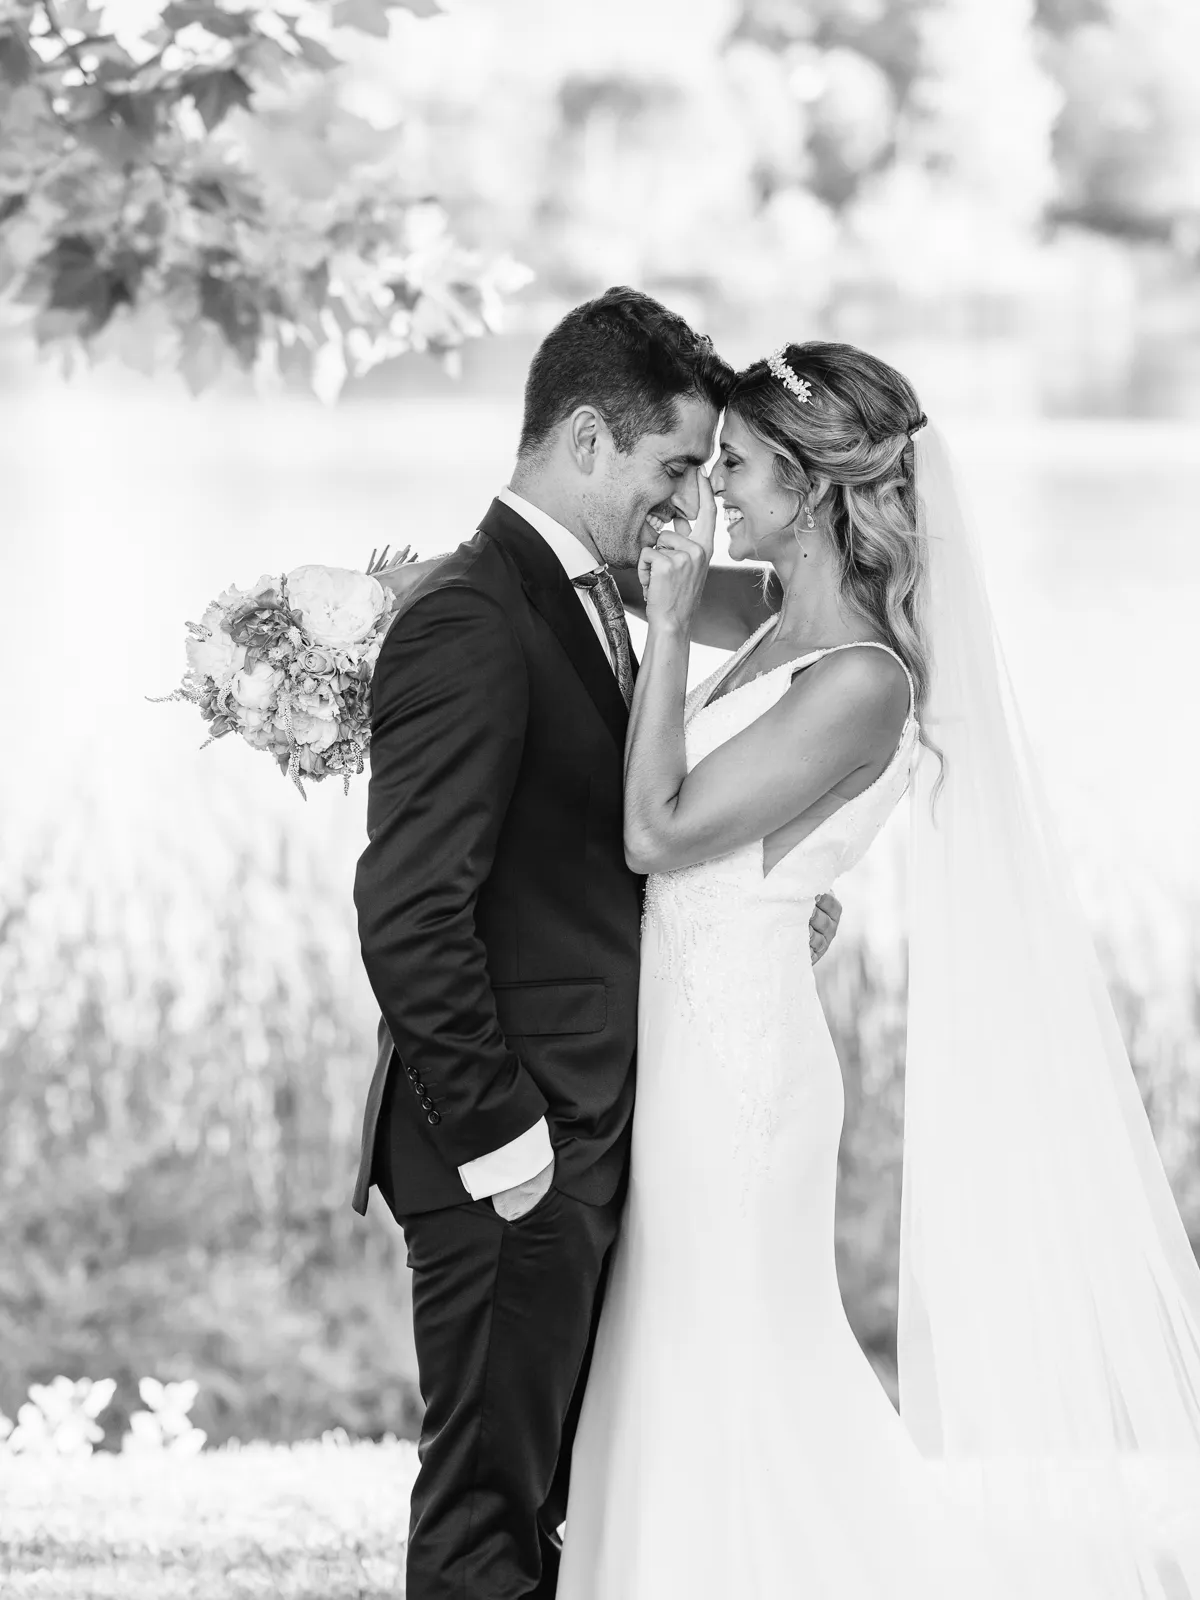 Prices for wedding photography in Portugal